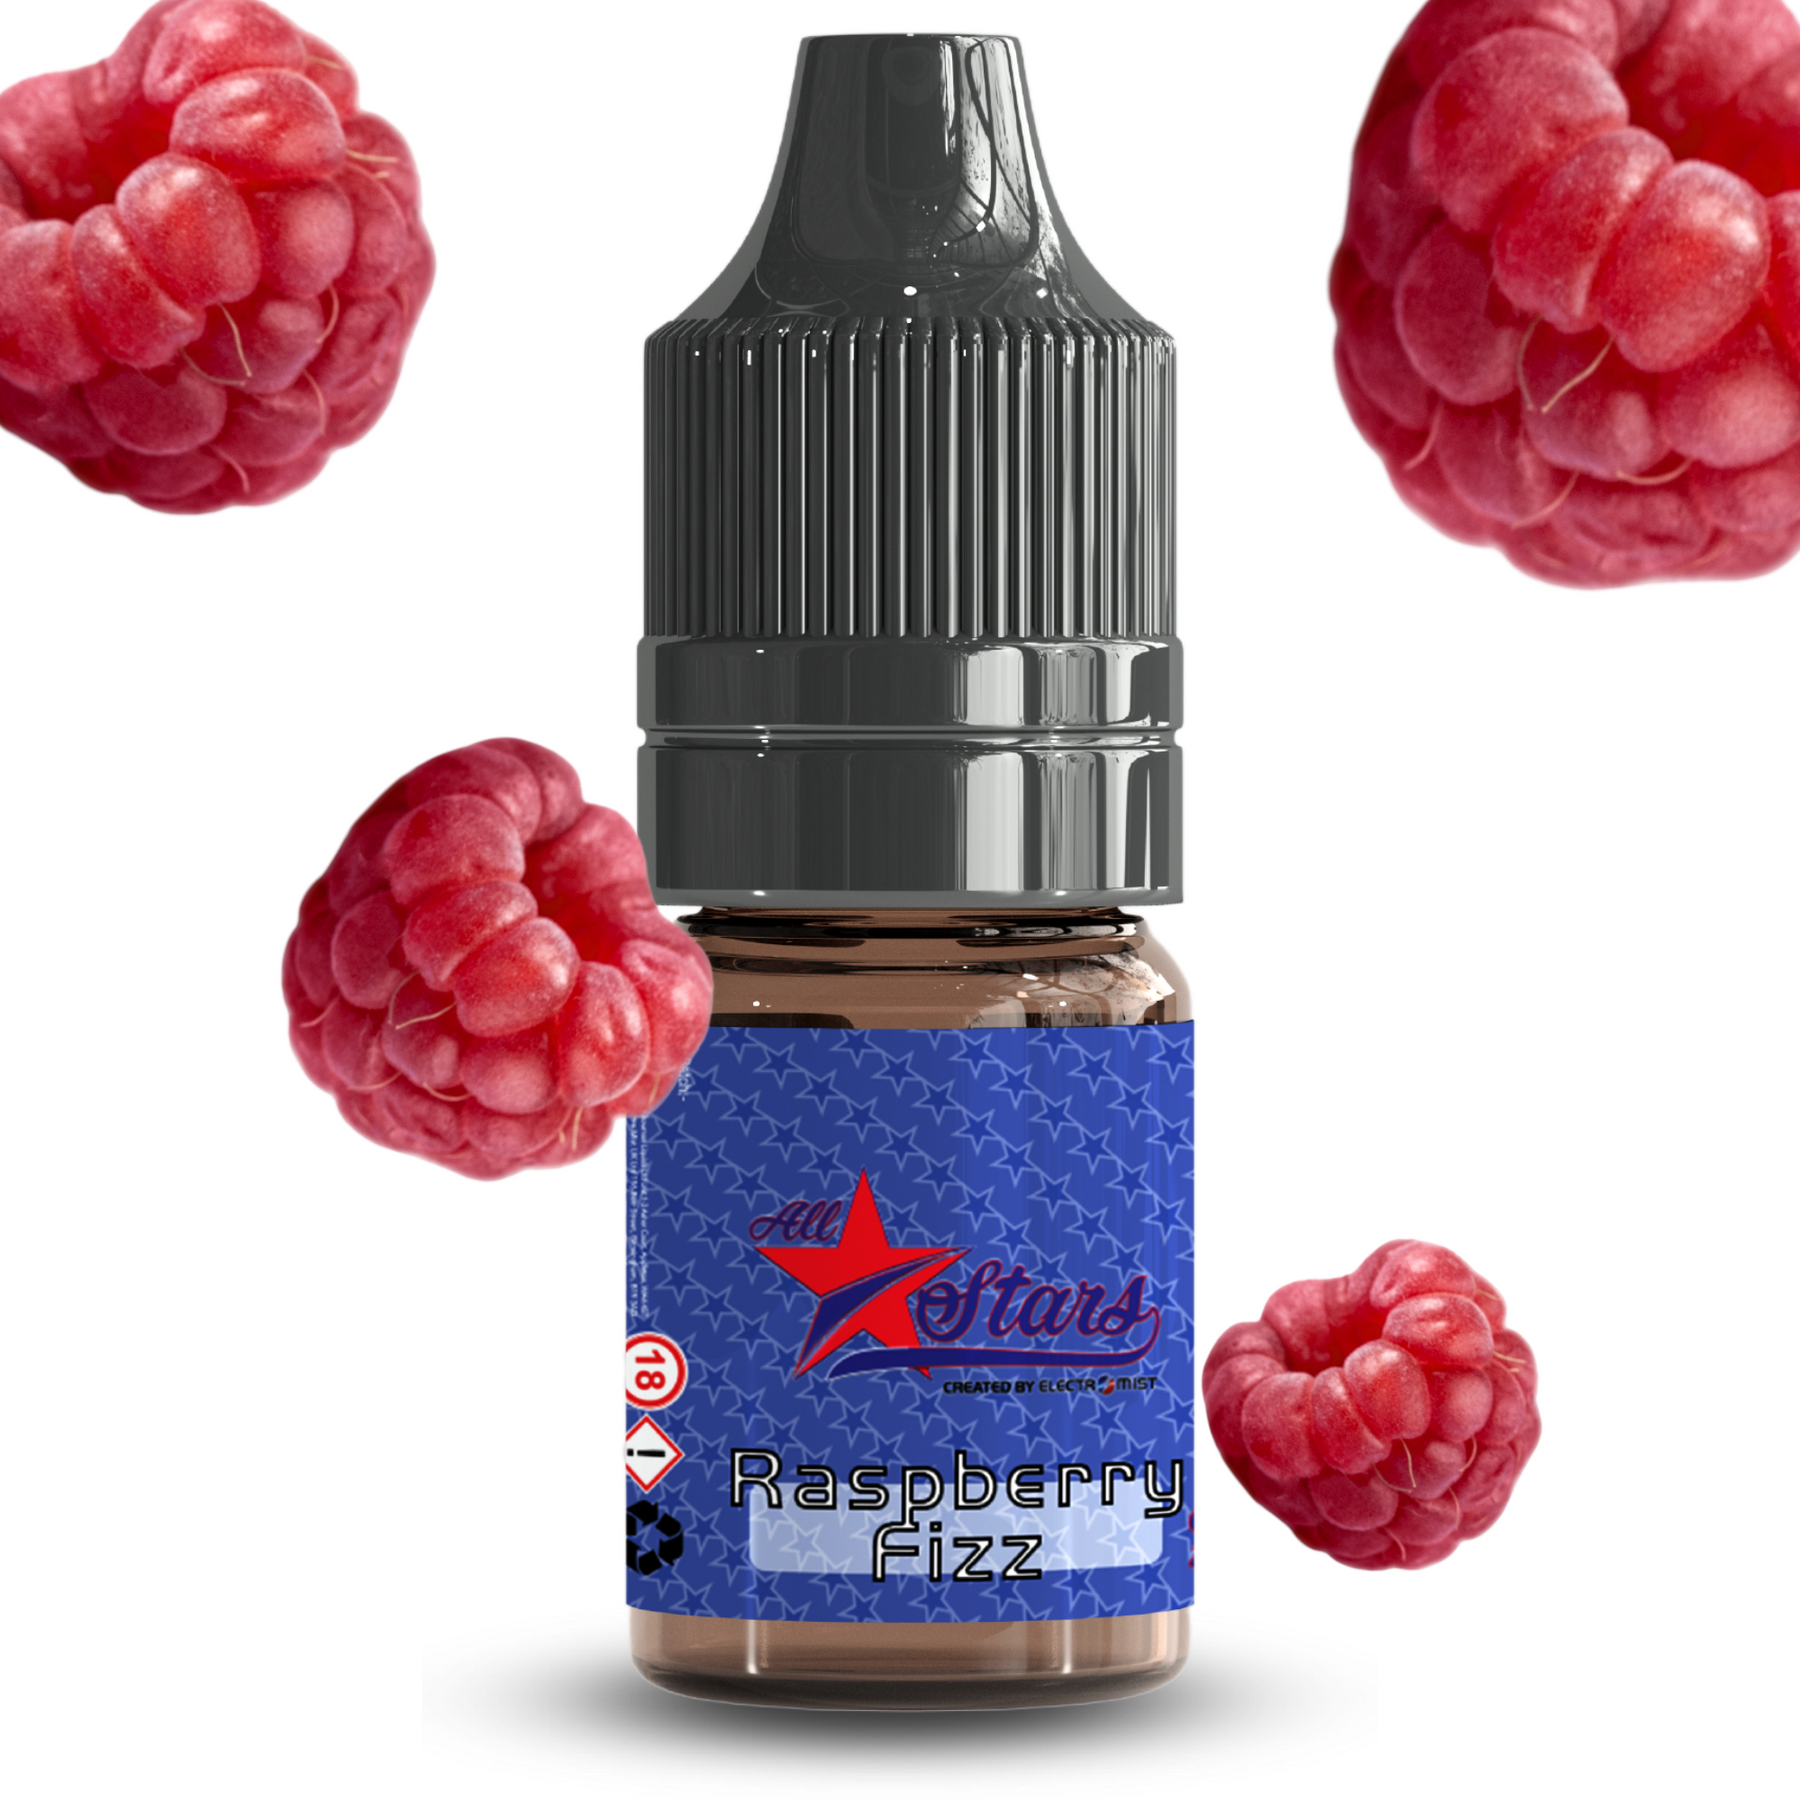 All Stars E-Liquid from the vape brand you can trust, Electromist, . Get your taste buds ready for a flavour sensation, Raspberry Fizz. Nicotine Content: 6mg/12mg/18mg Products may contain nicotine. For over 18s Only ejuice, vape pen, eliquid, e cigarette, 10ml, vaping, cloud, PG, VG, 60/40, vape liquid, Flavour, TPD